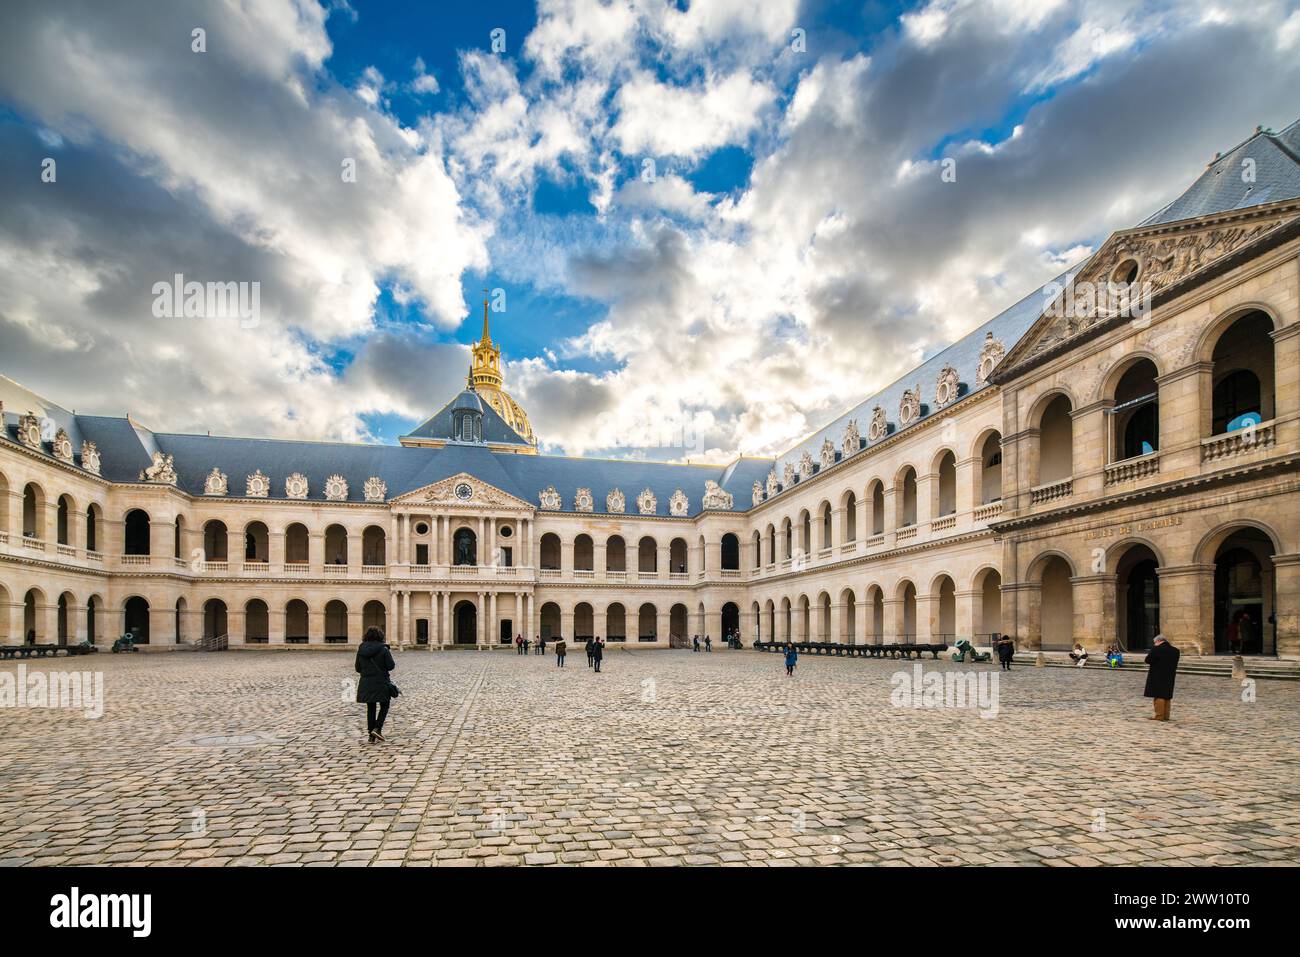 A large courtyard with a clock tower at Les Invalides in Paris, France. Stock Photo